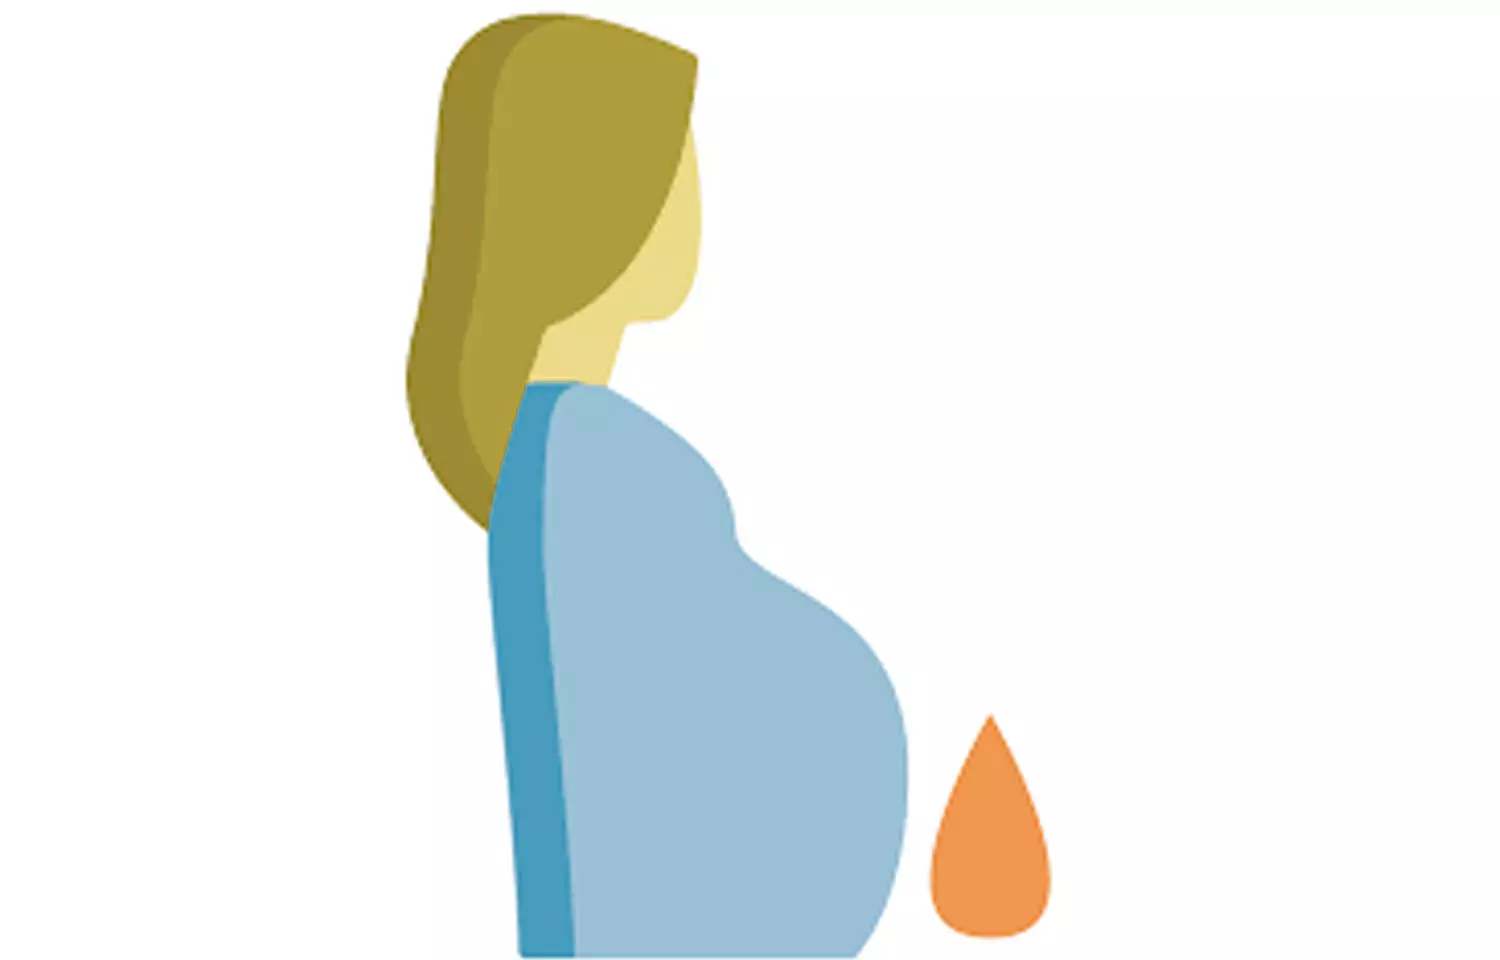 Review finds best uterotonic drug for treatment of postpartum hemorrhage